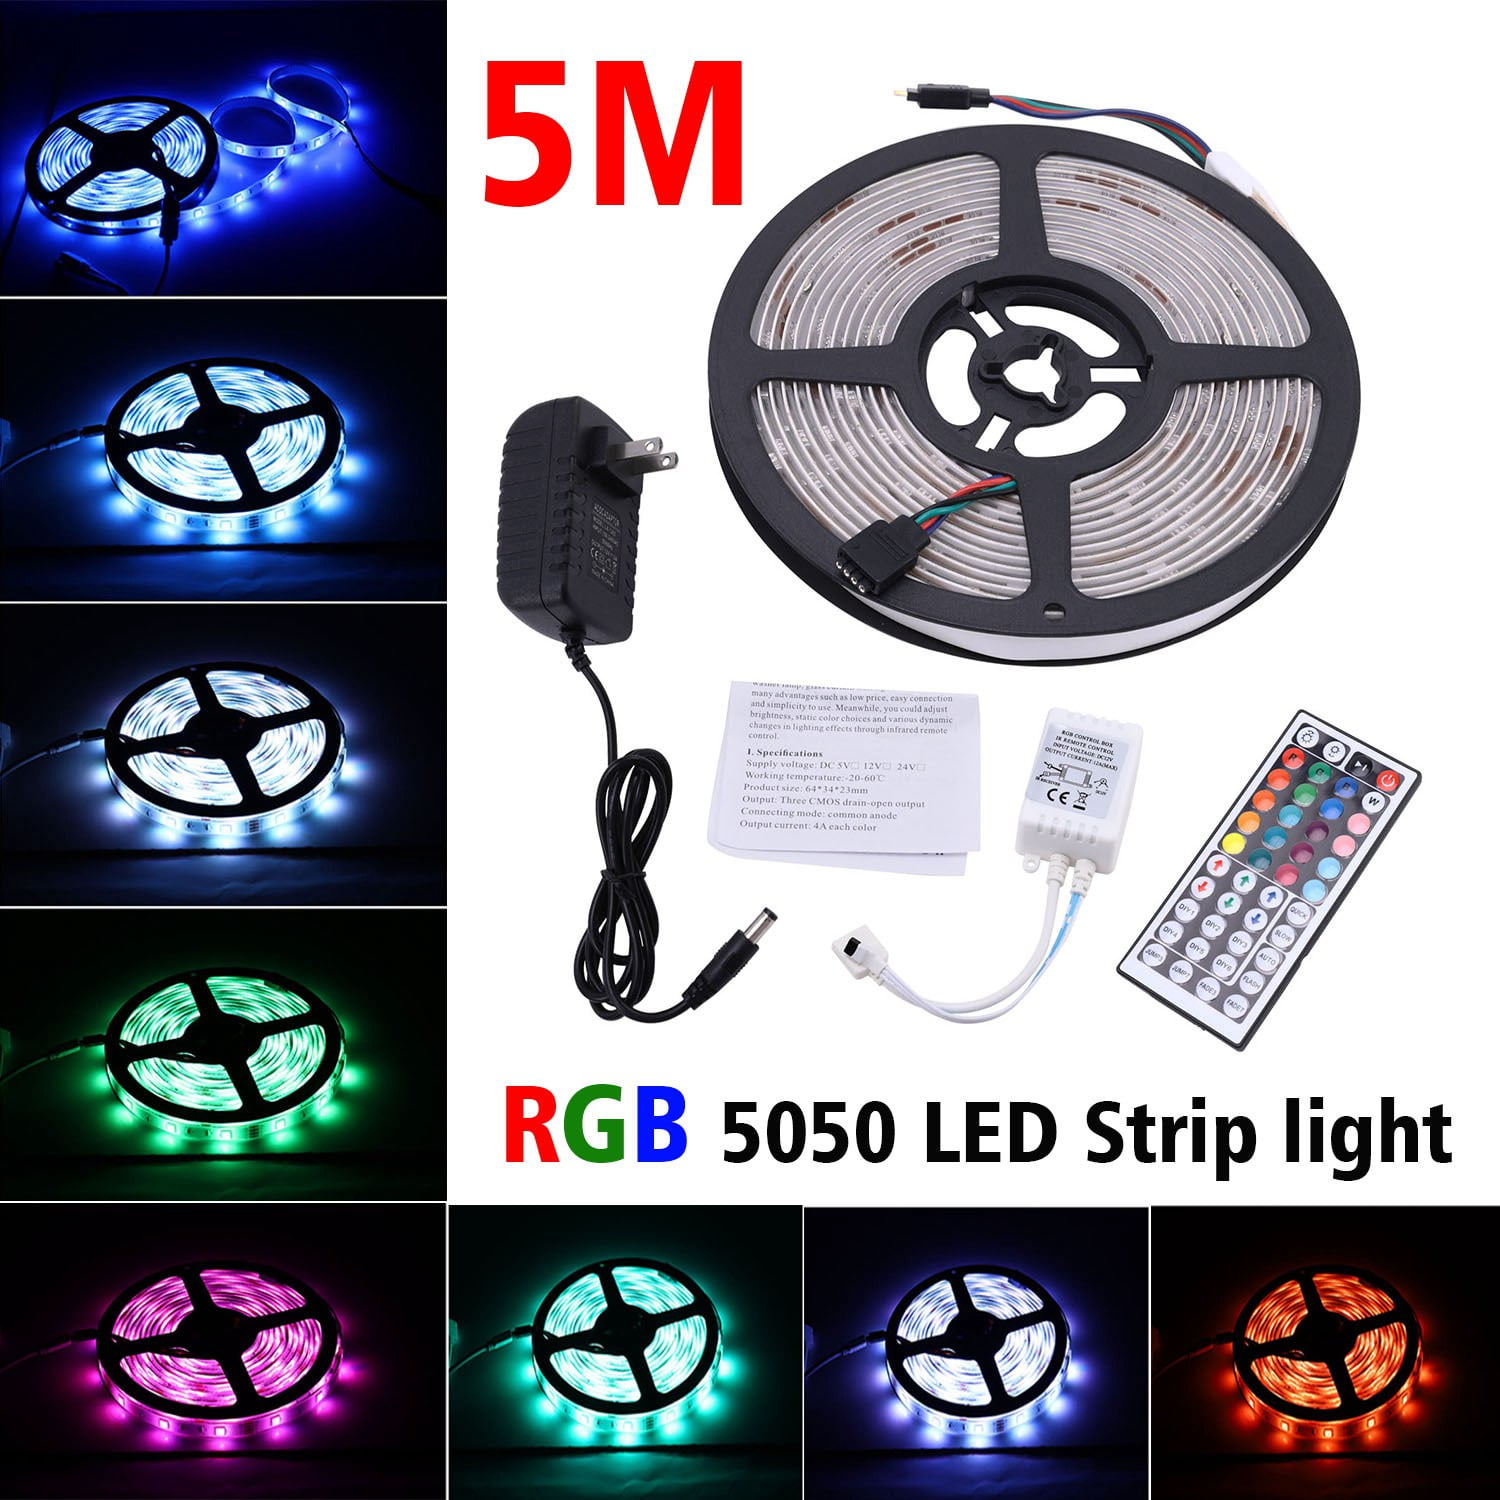 Red Details about   USB Power Supply LED Strip Lights 1 Meter New 